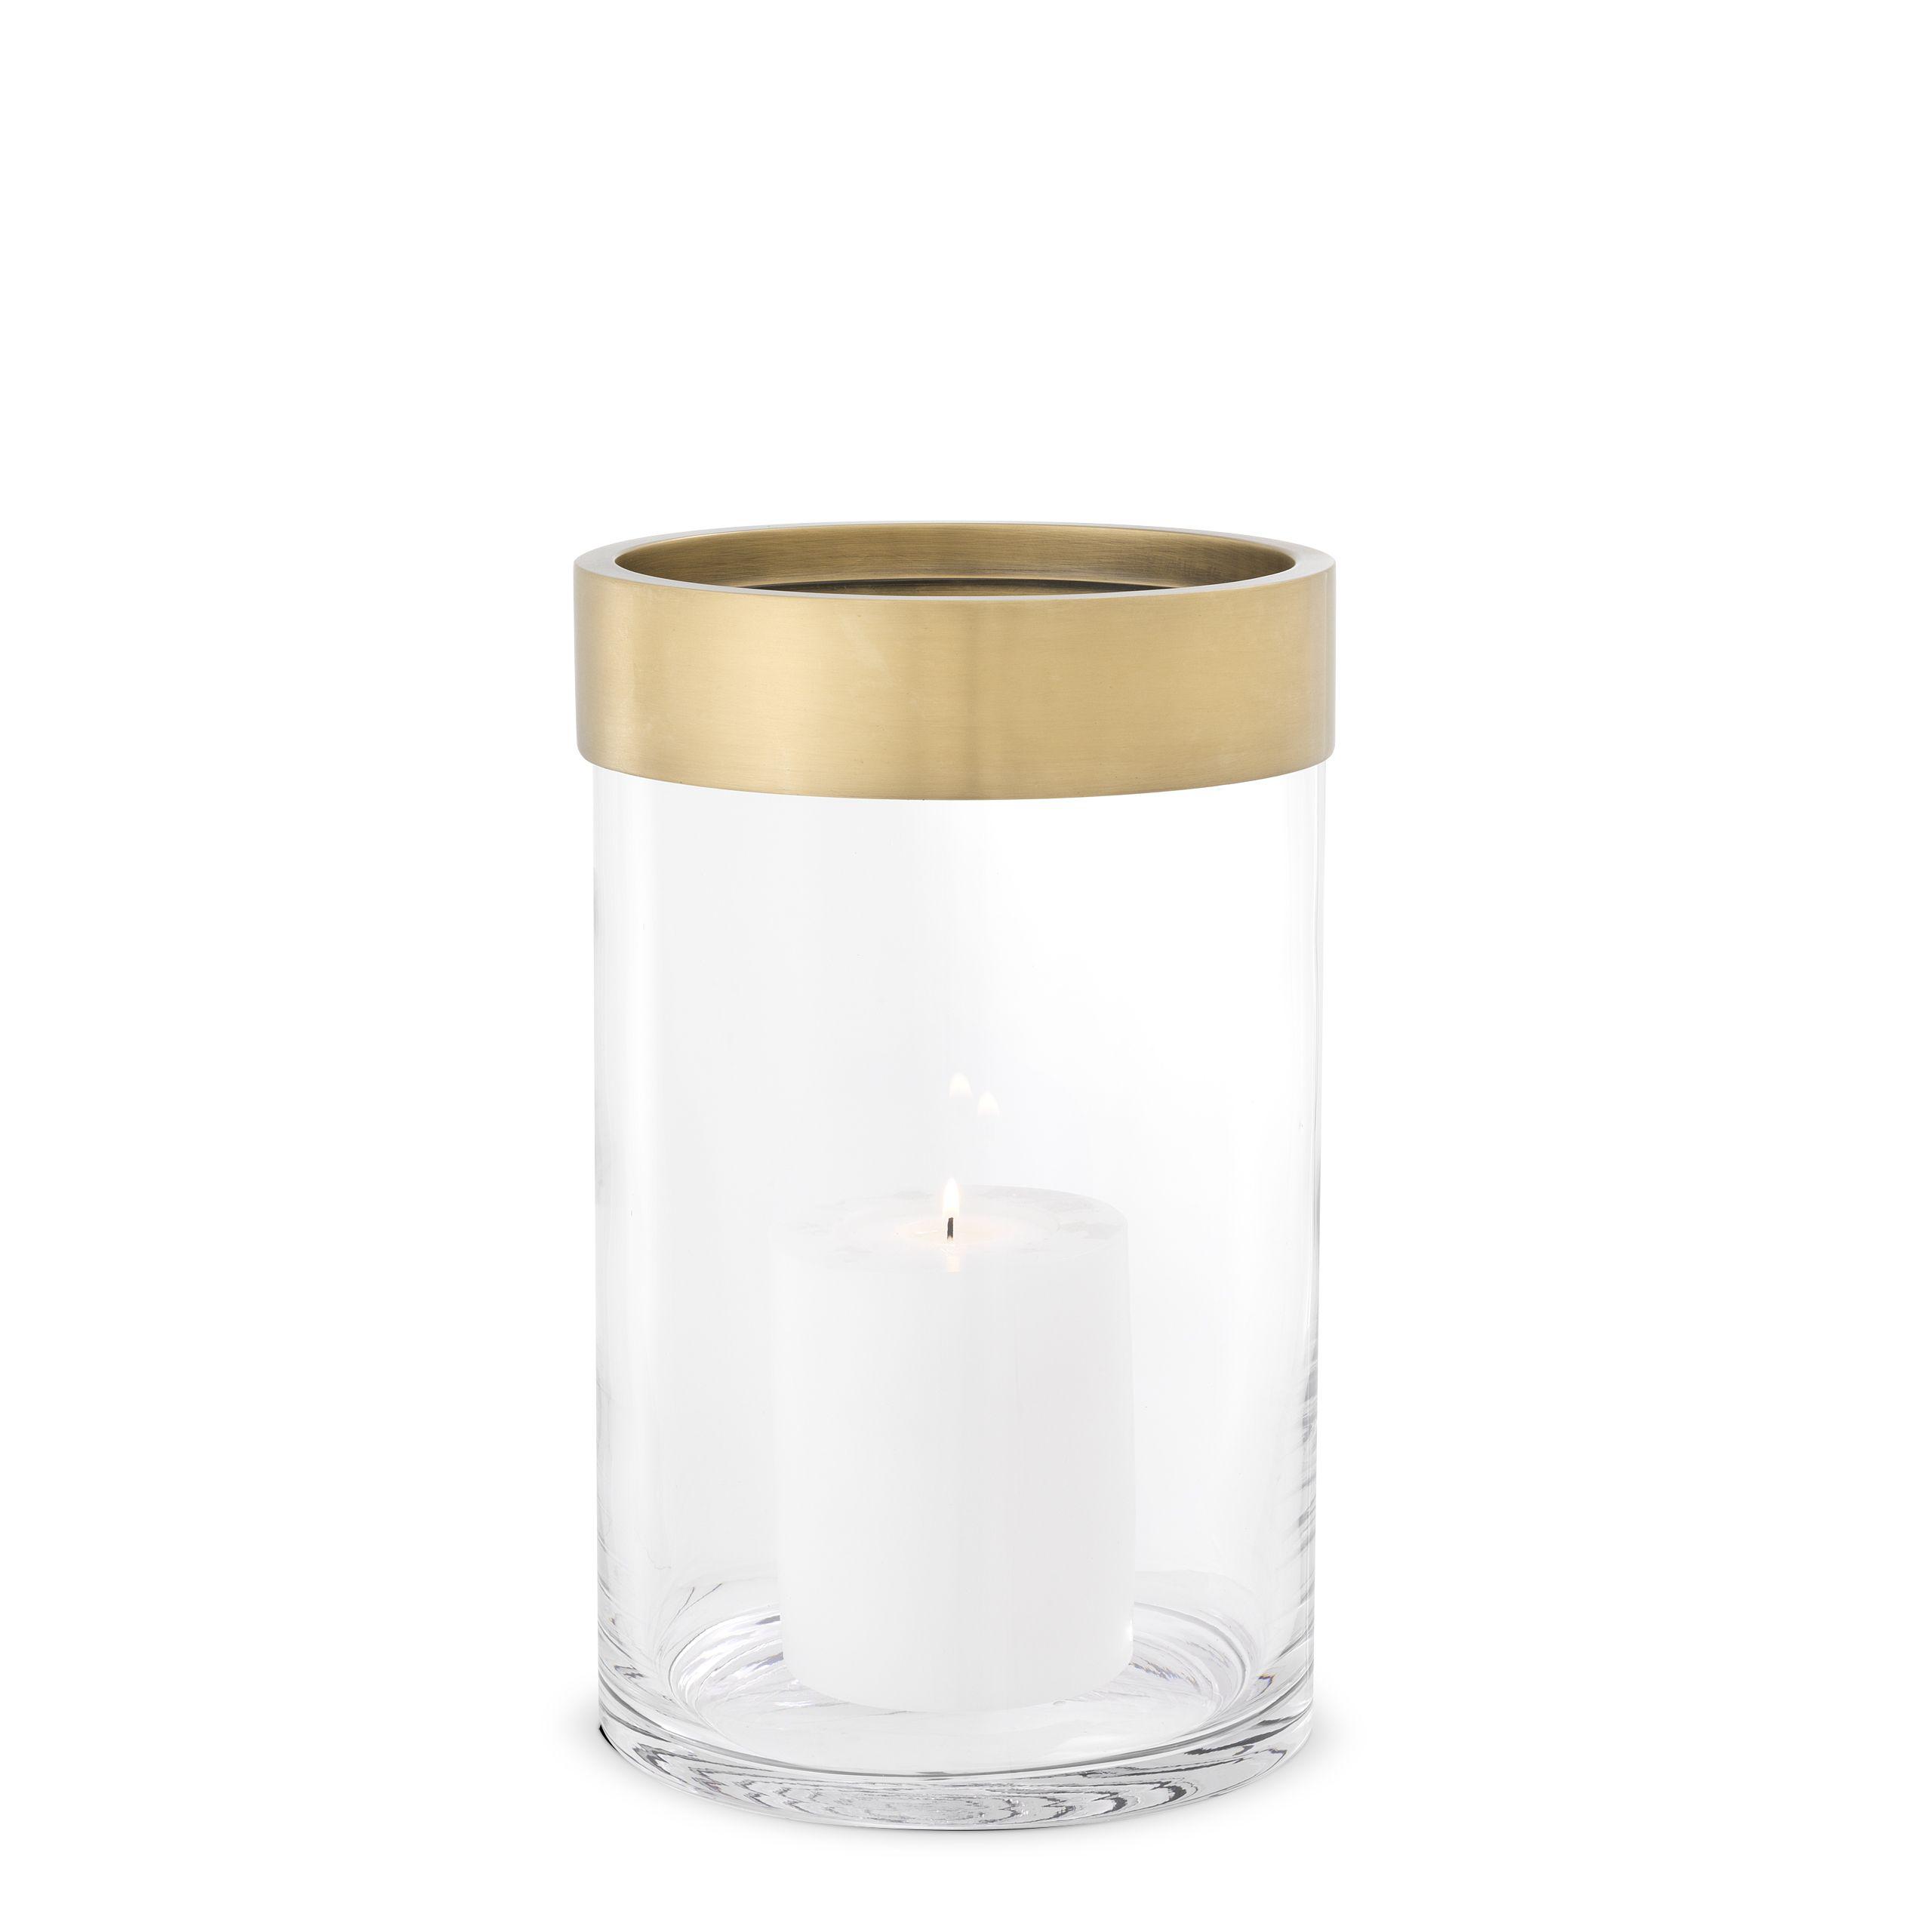 clear glass | antique brass finish S